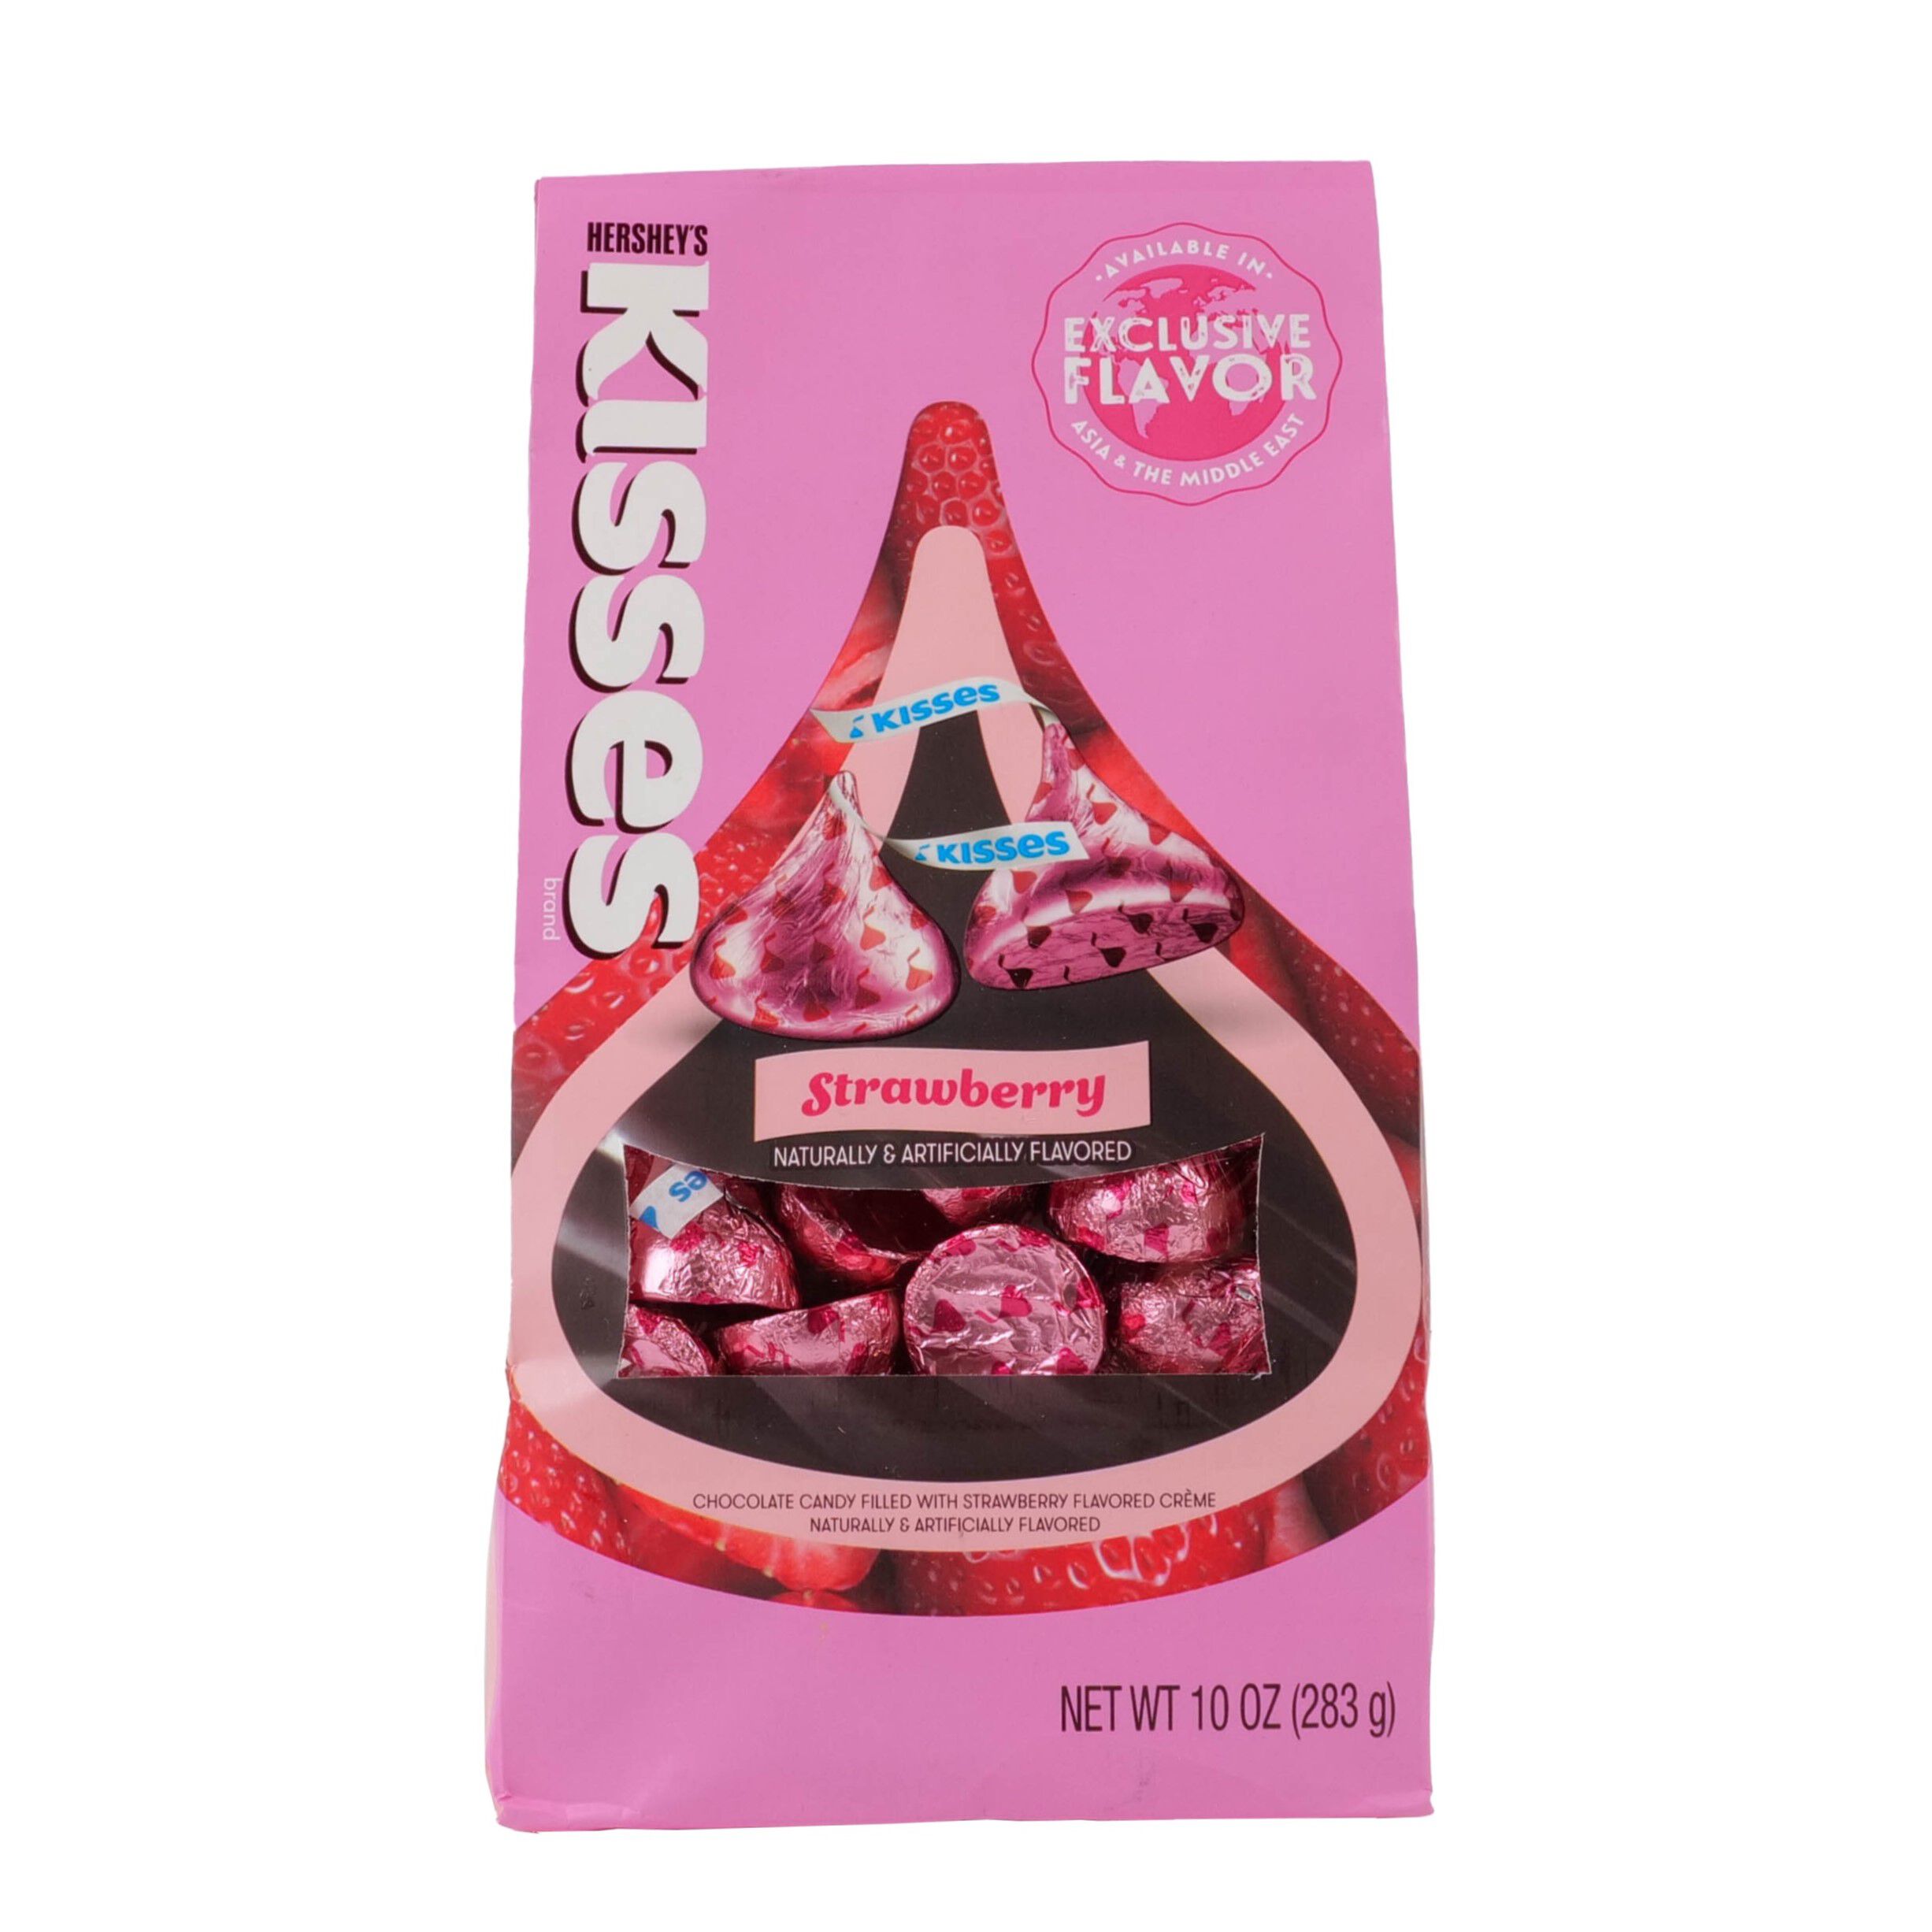 HERSHEY'S KISSES Flavors of The World Strawberry 10oz Pouch